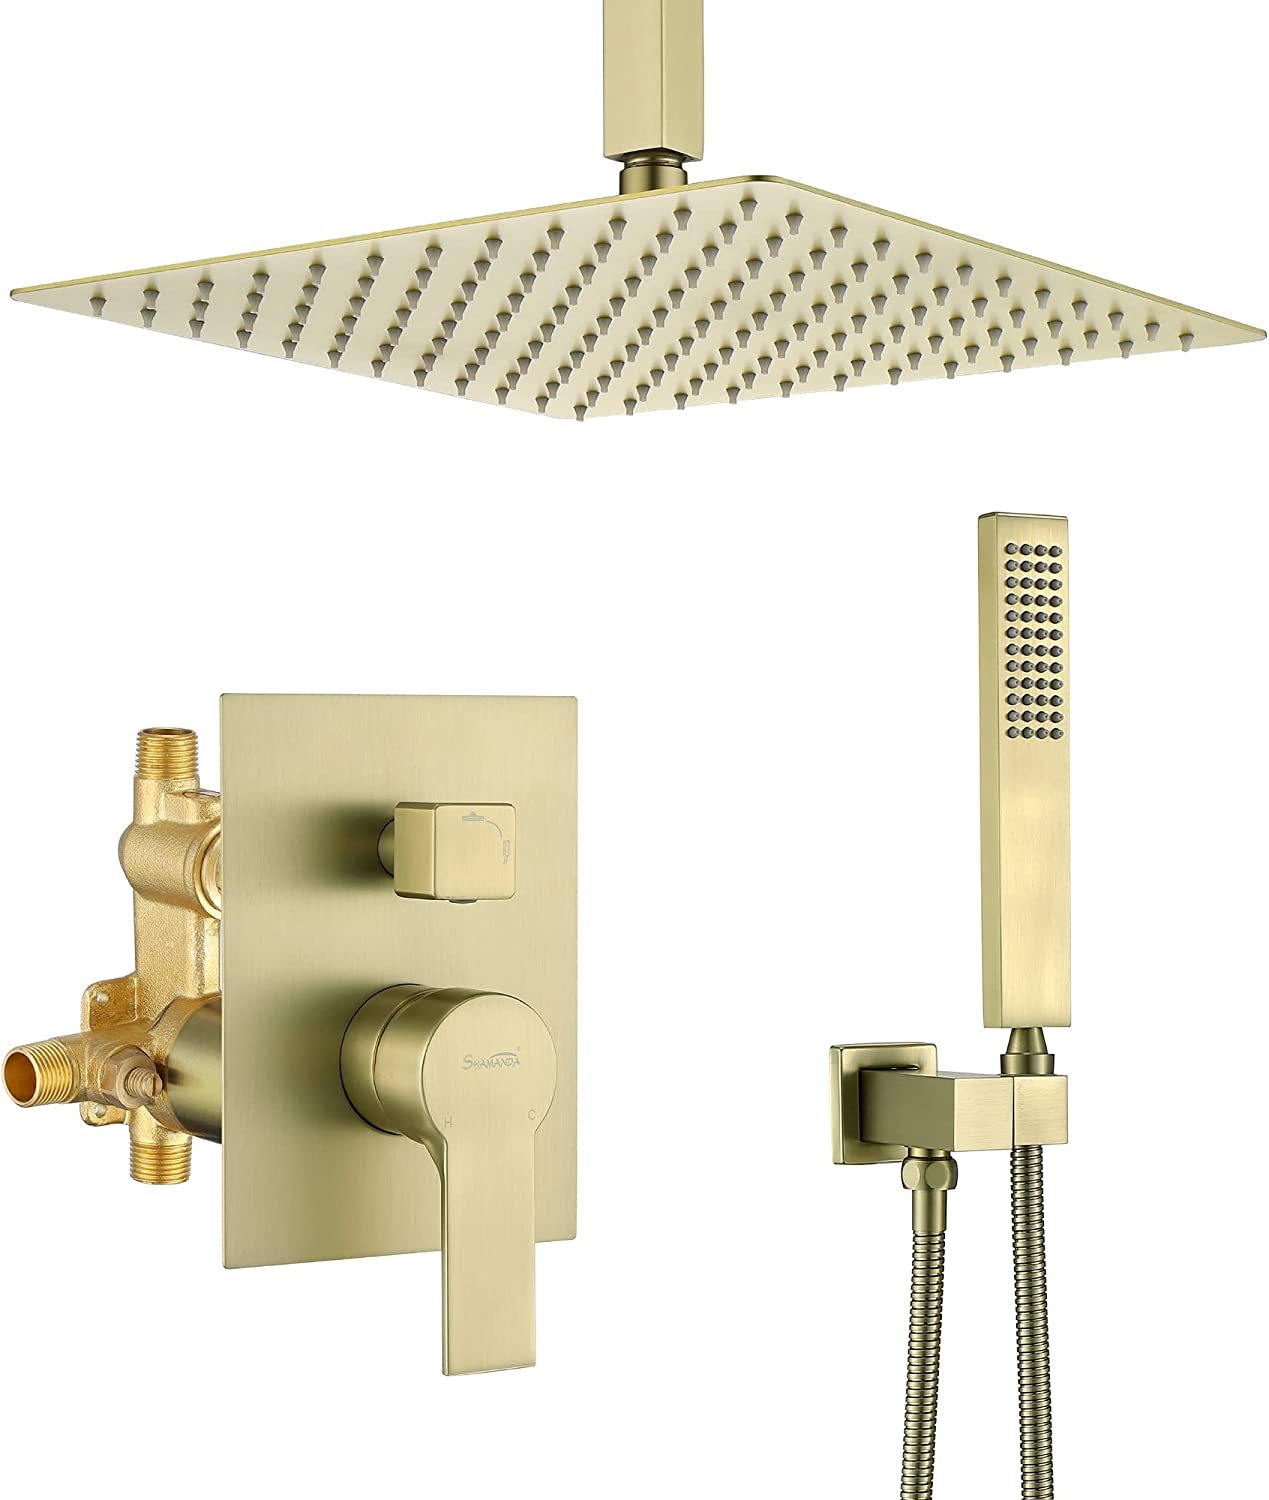 Primary image for Bathroom 12-Inch Luxury Rain Mixer Shower Combo Set Rainfall Shower Faucet, 3.